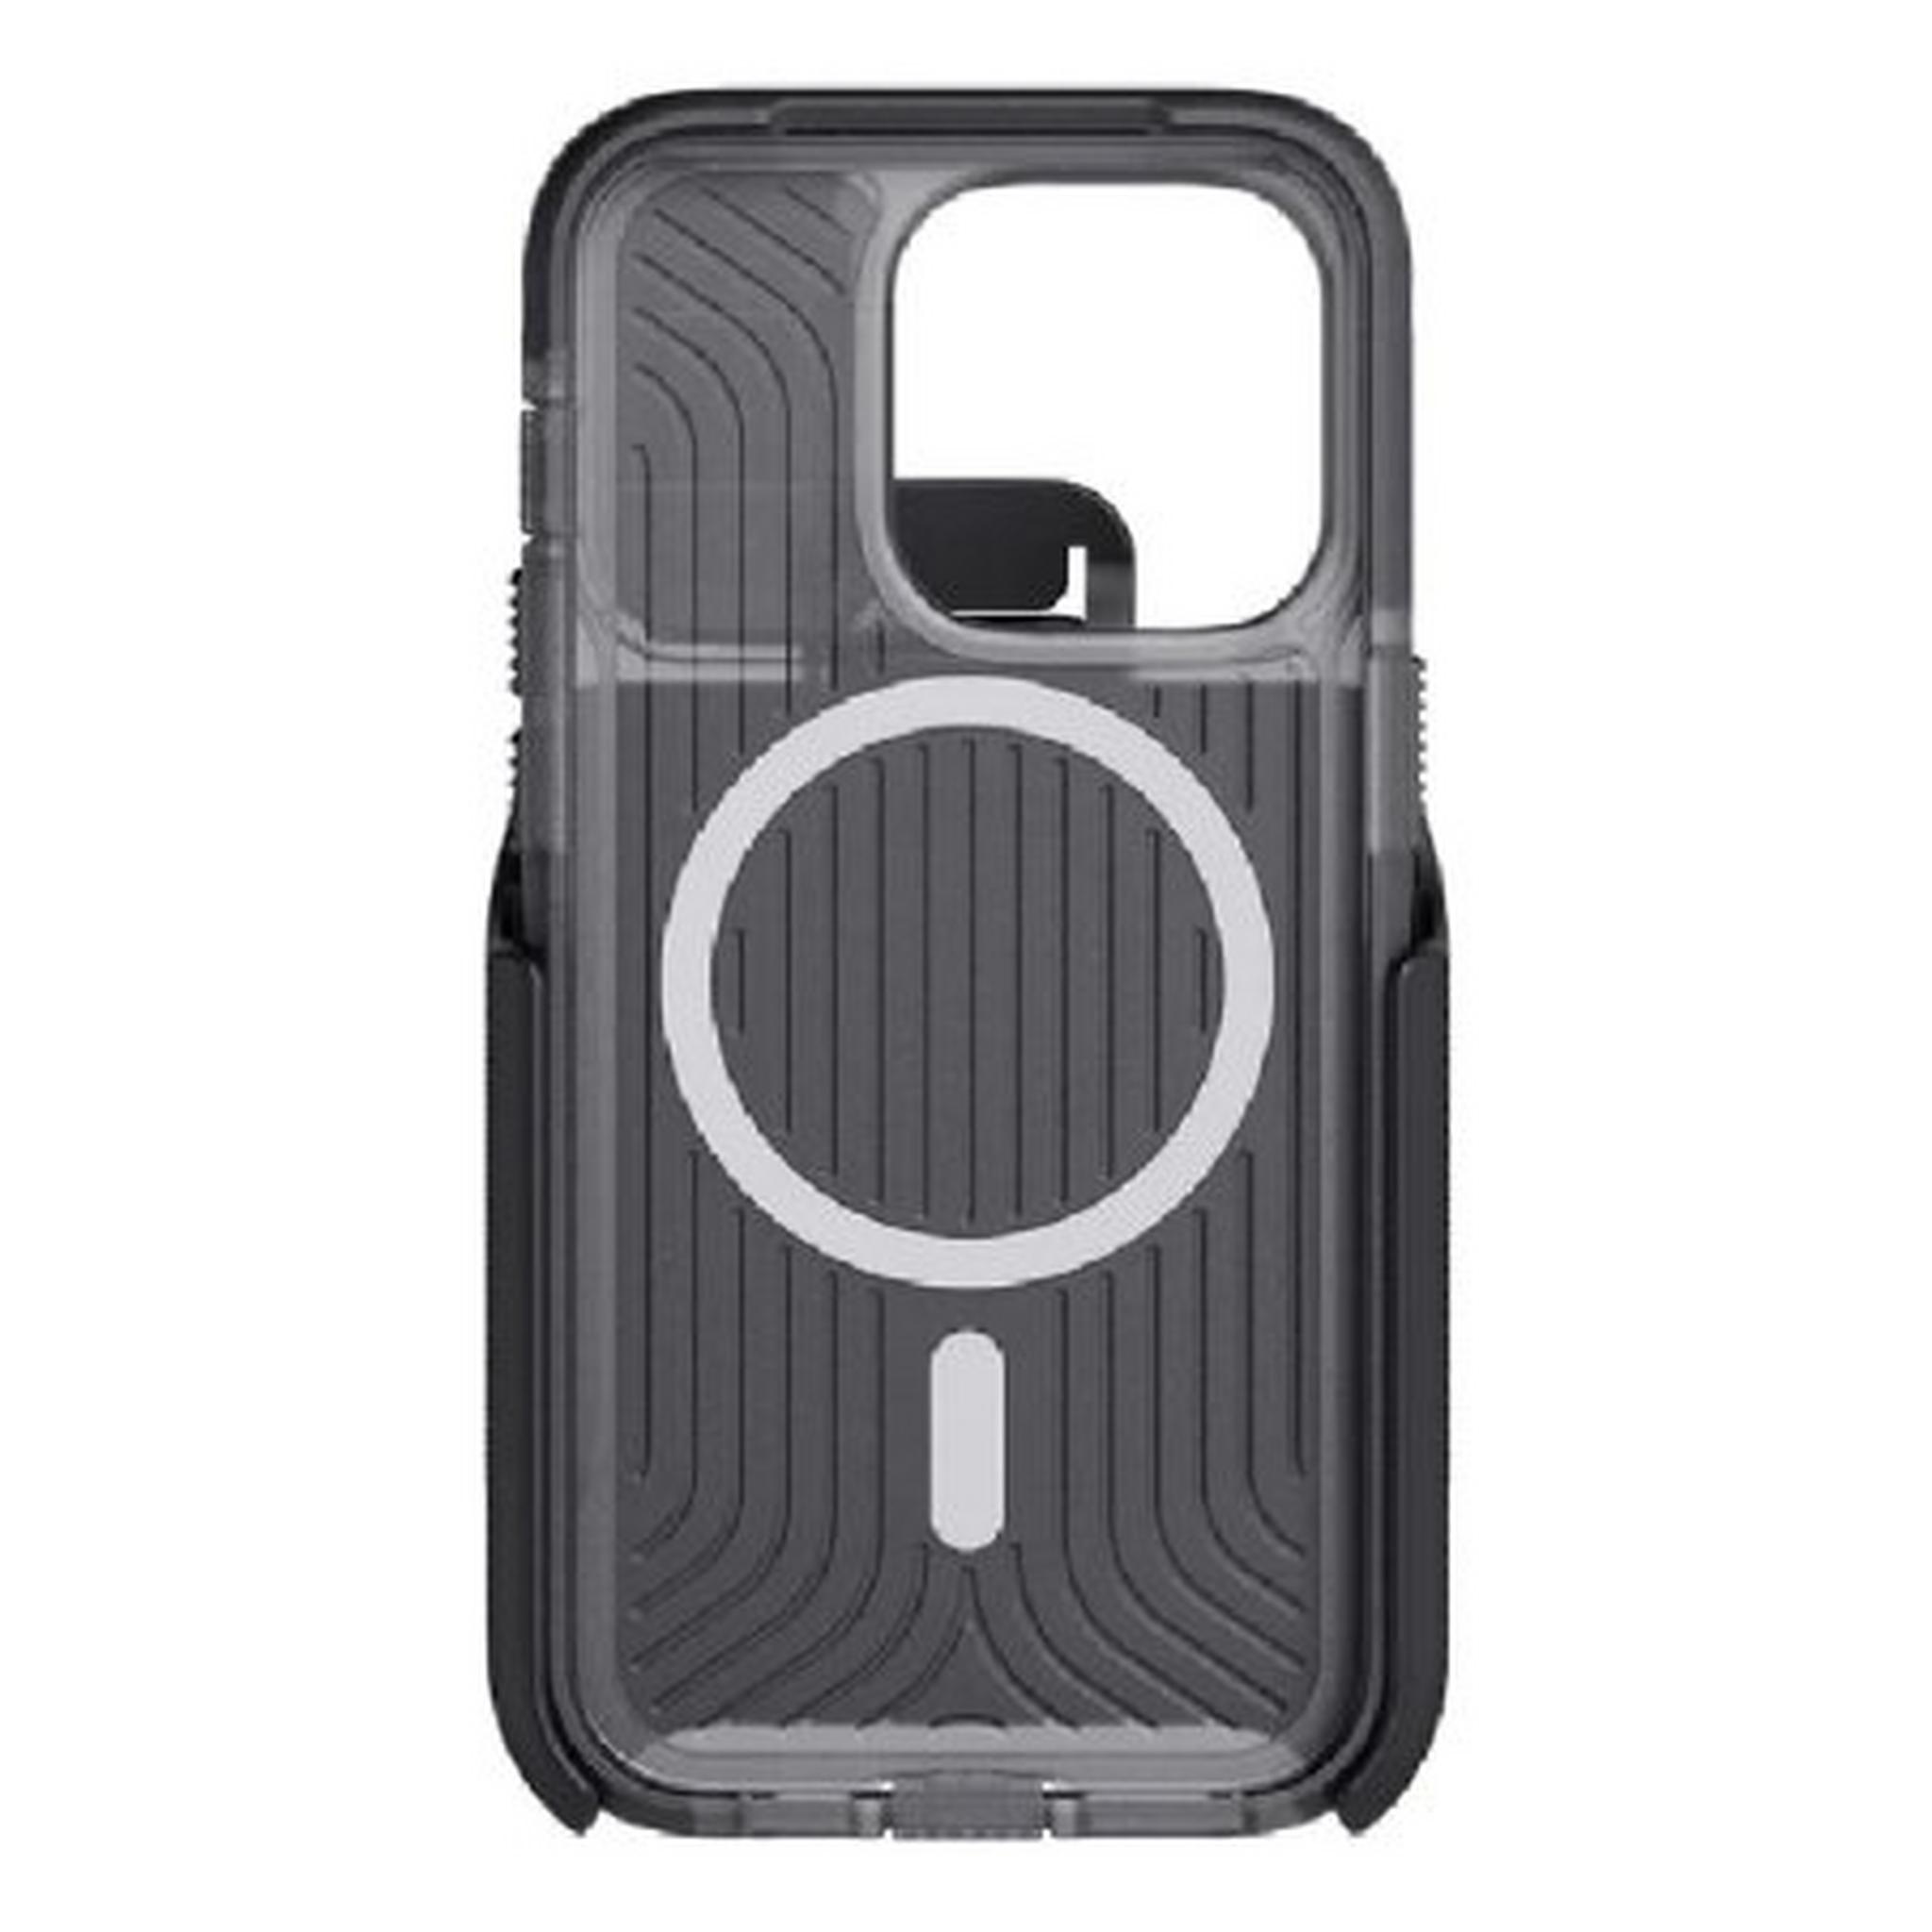 Tech21 EvoMax Case for iPhone 14 Pro with Magsafe and Holster, T21-9707 - Clear Black